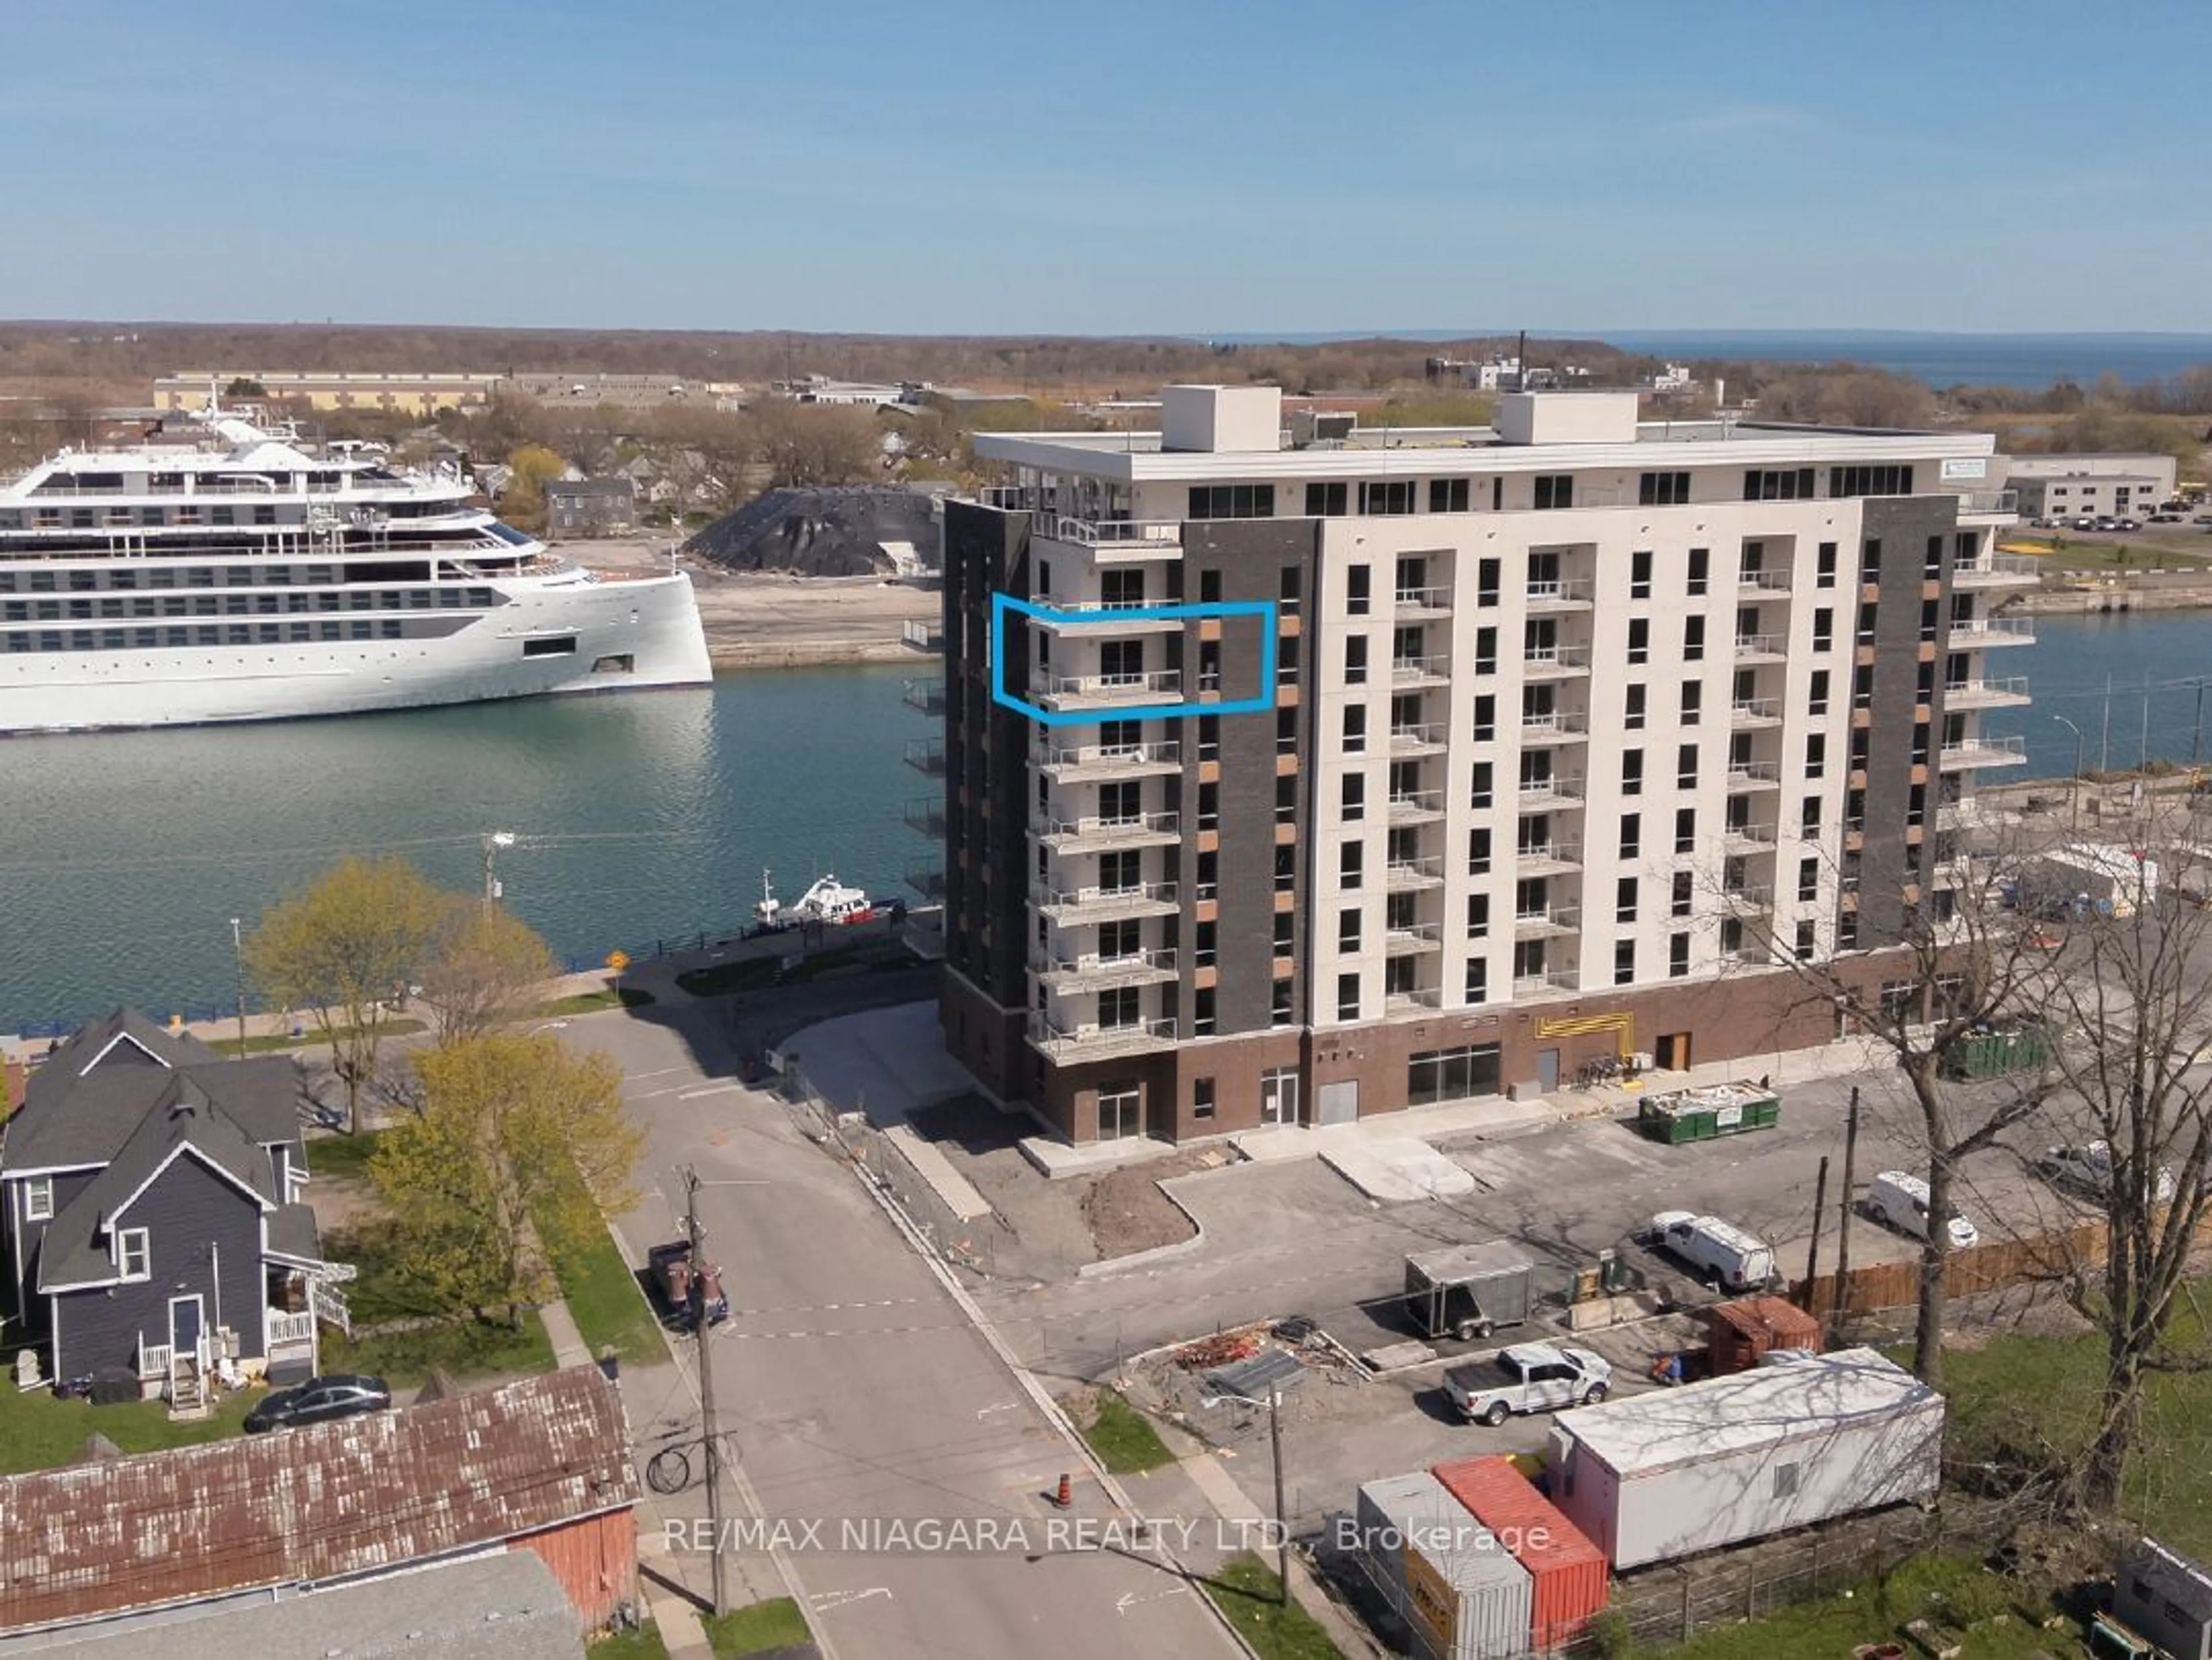 Lakeview for 118 West St #705, Port Colborne Ontario L3K 4E6